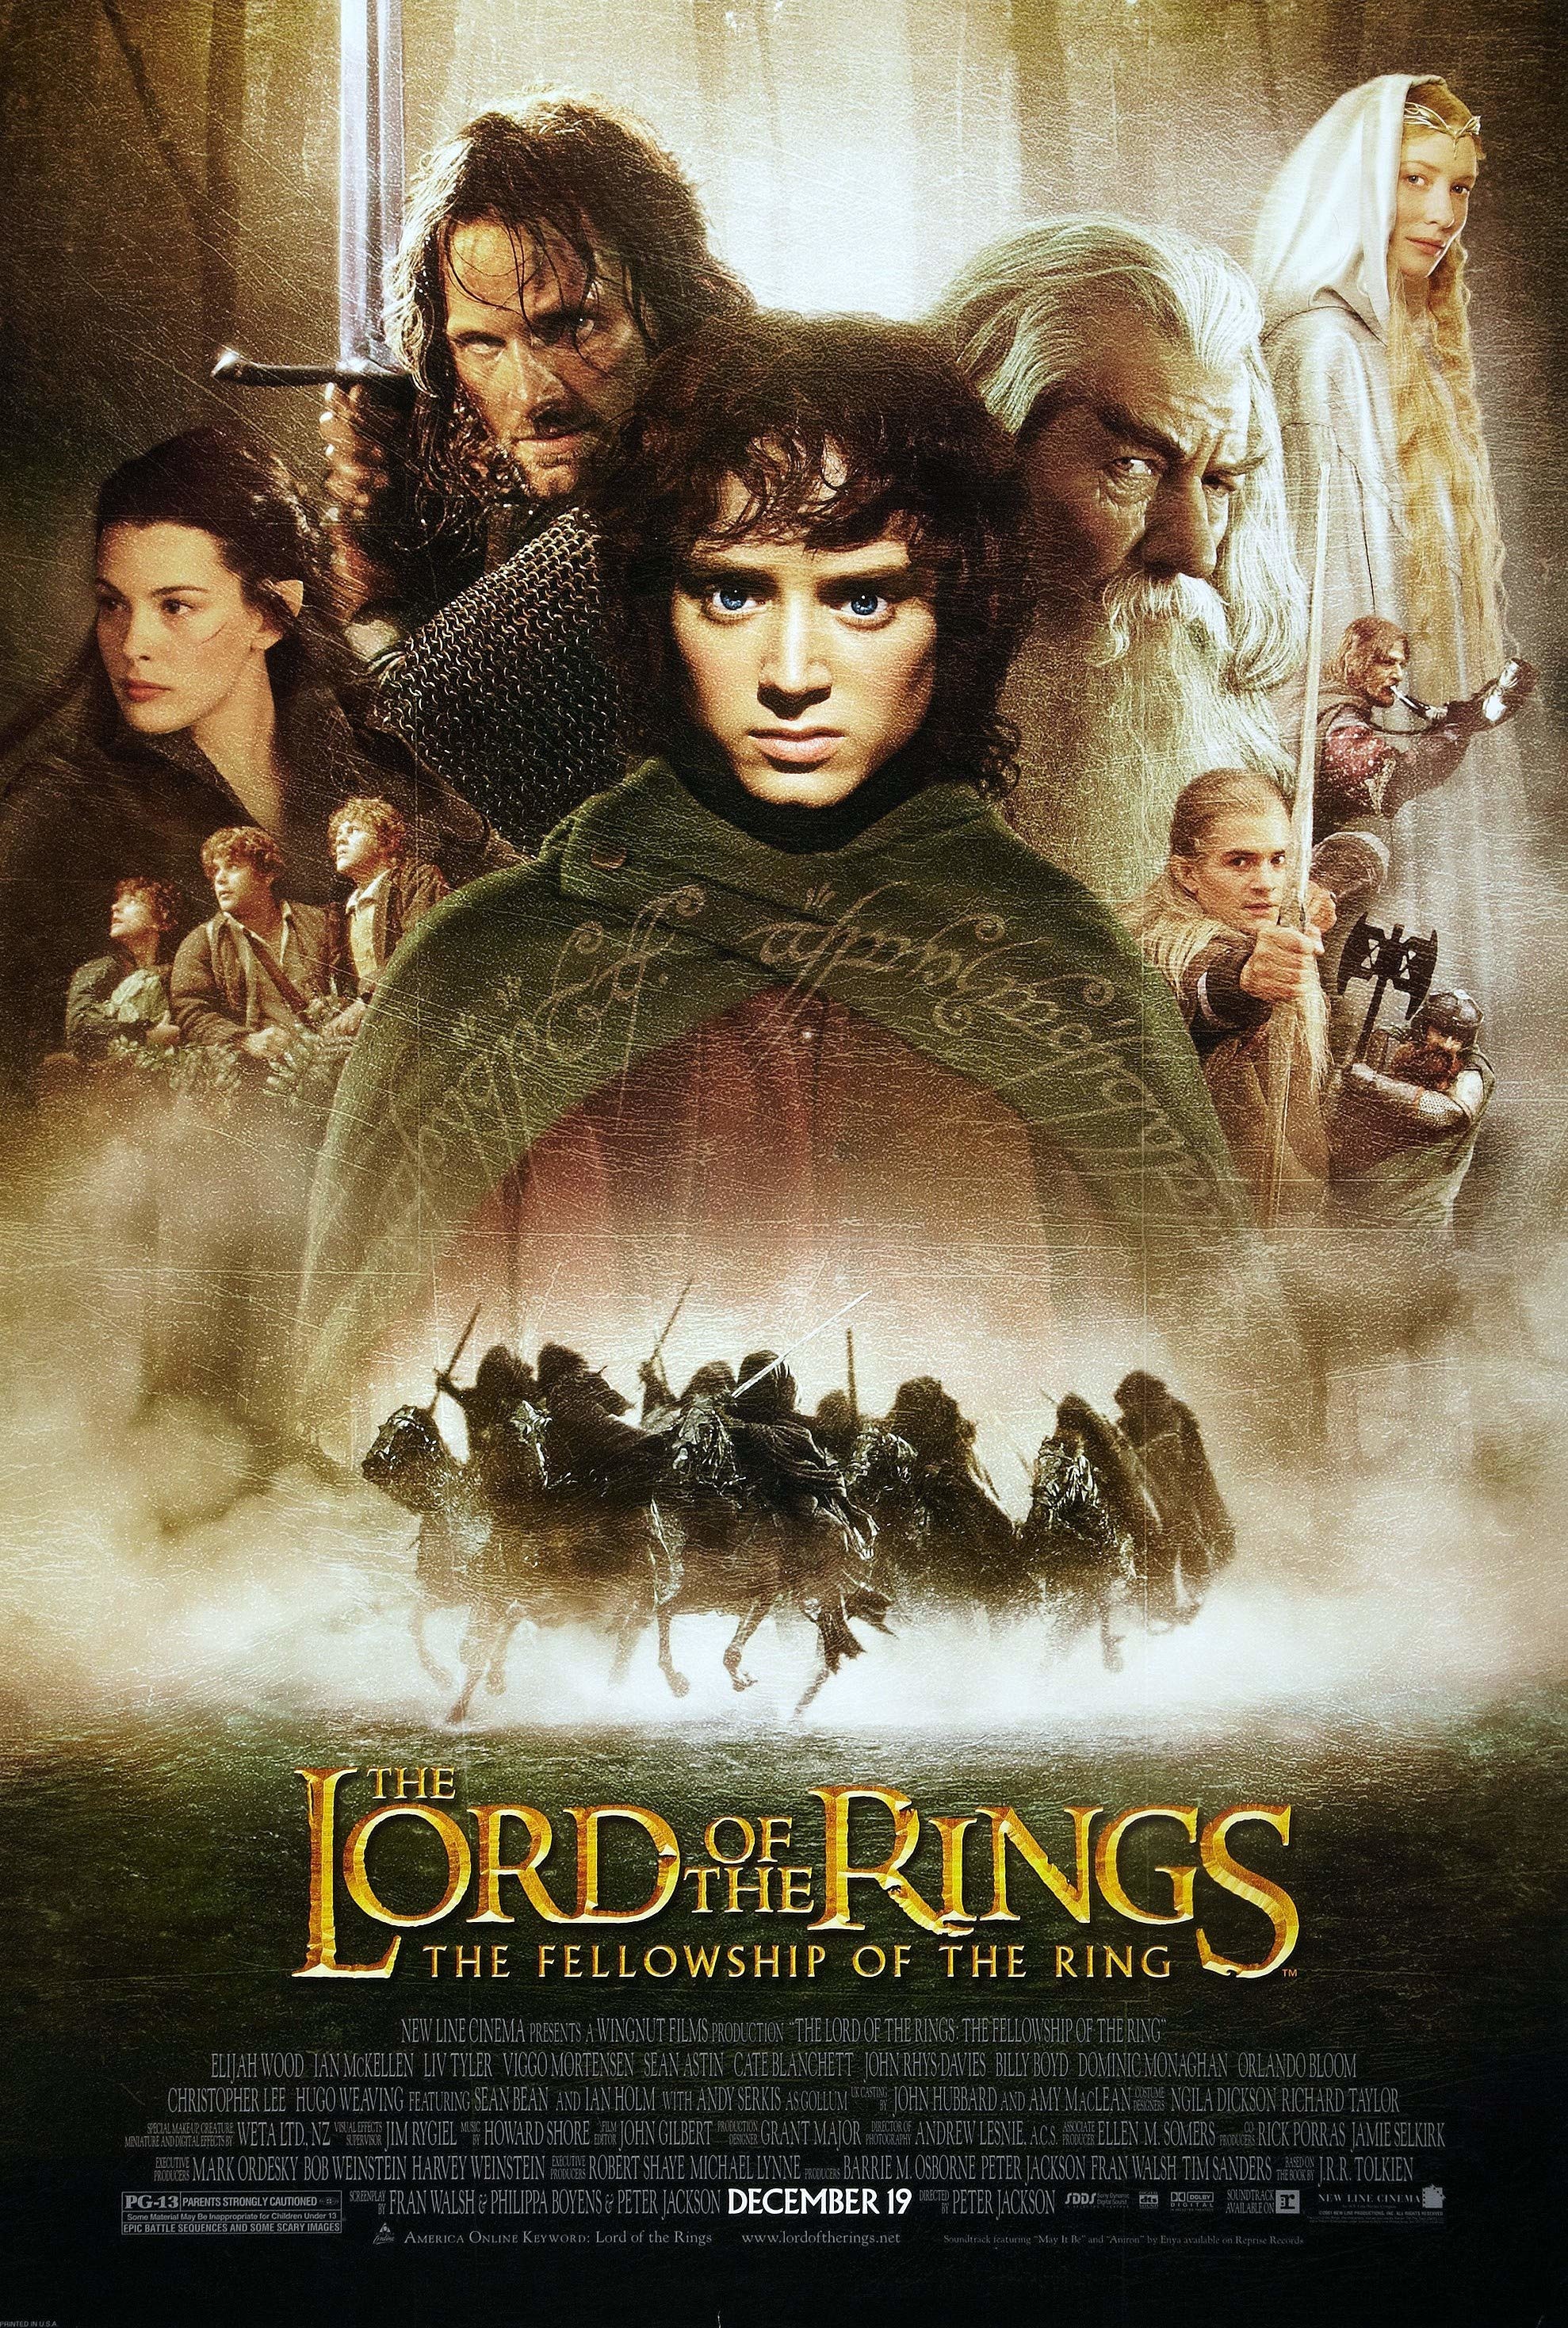 The Lord of the Rings film trilogy The One Wiki to Rule Them All Fandom pic